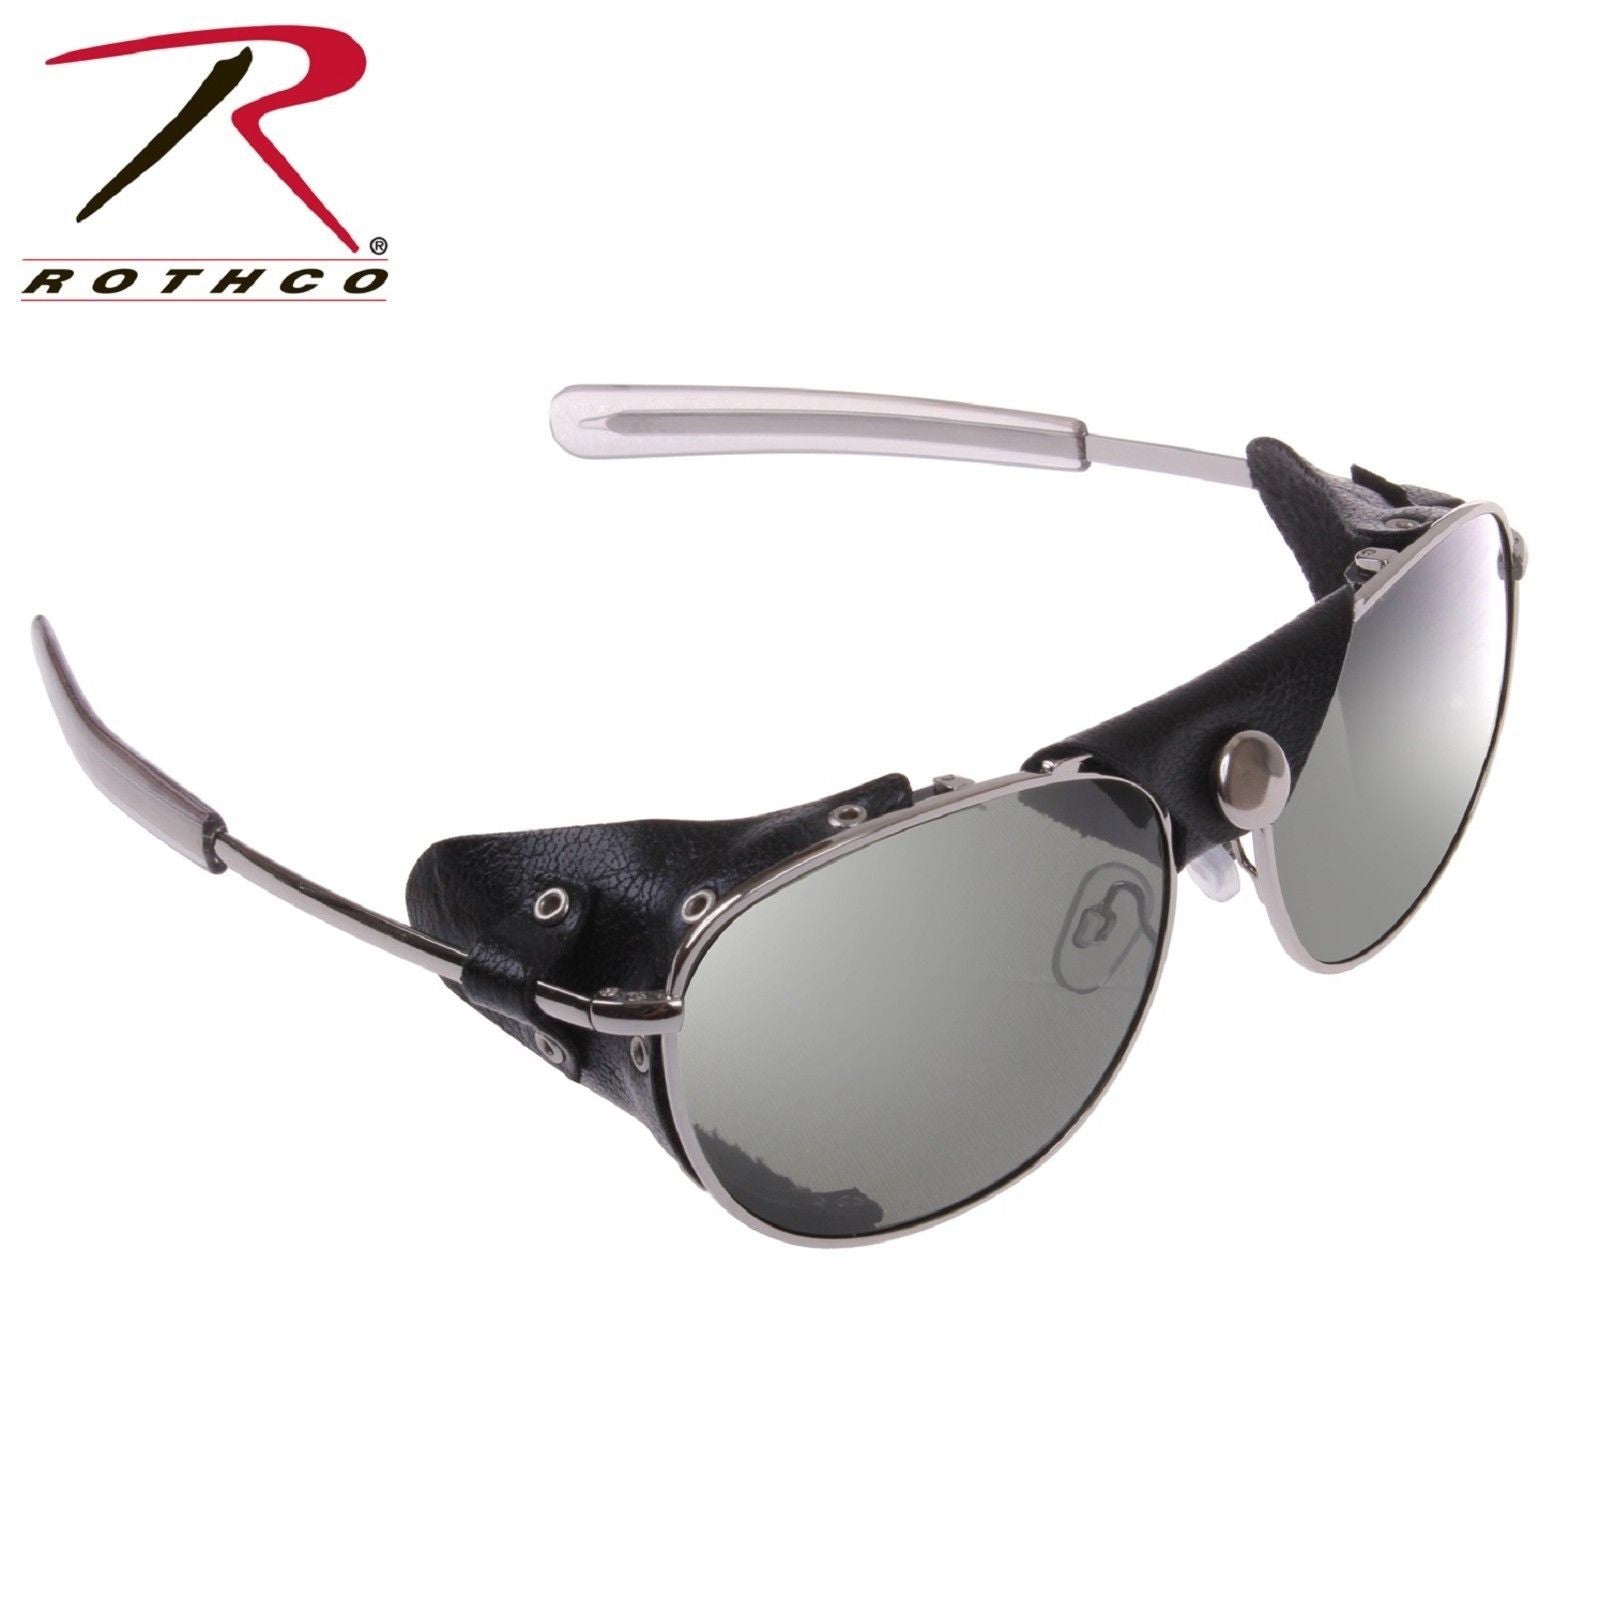 Rothco Tactical Aviator Sunglasses with Wind Guards - Chrome / Smoke - 58 mm